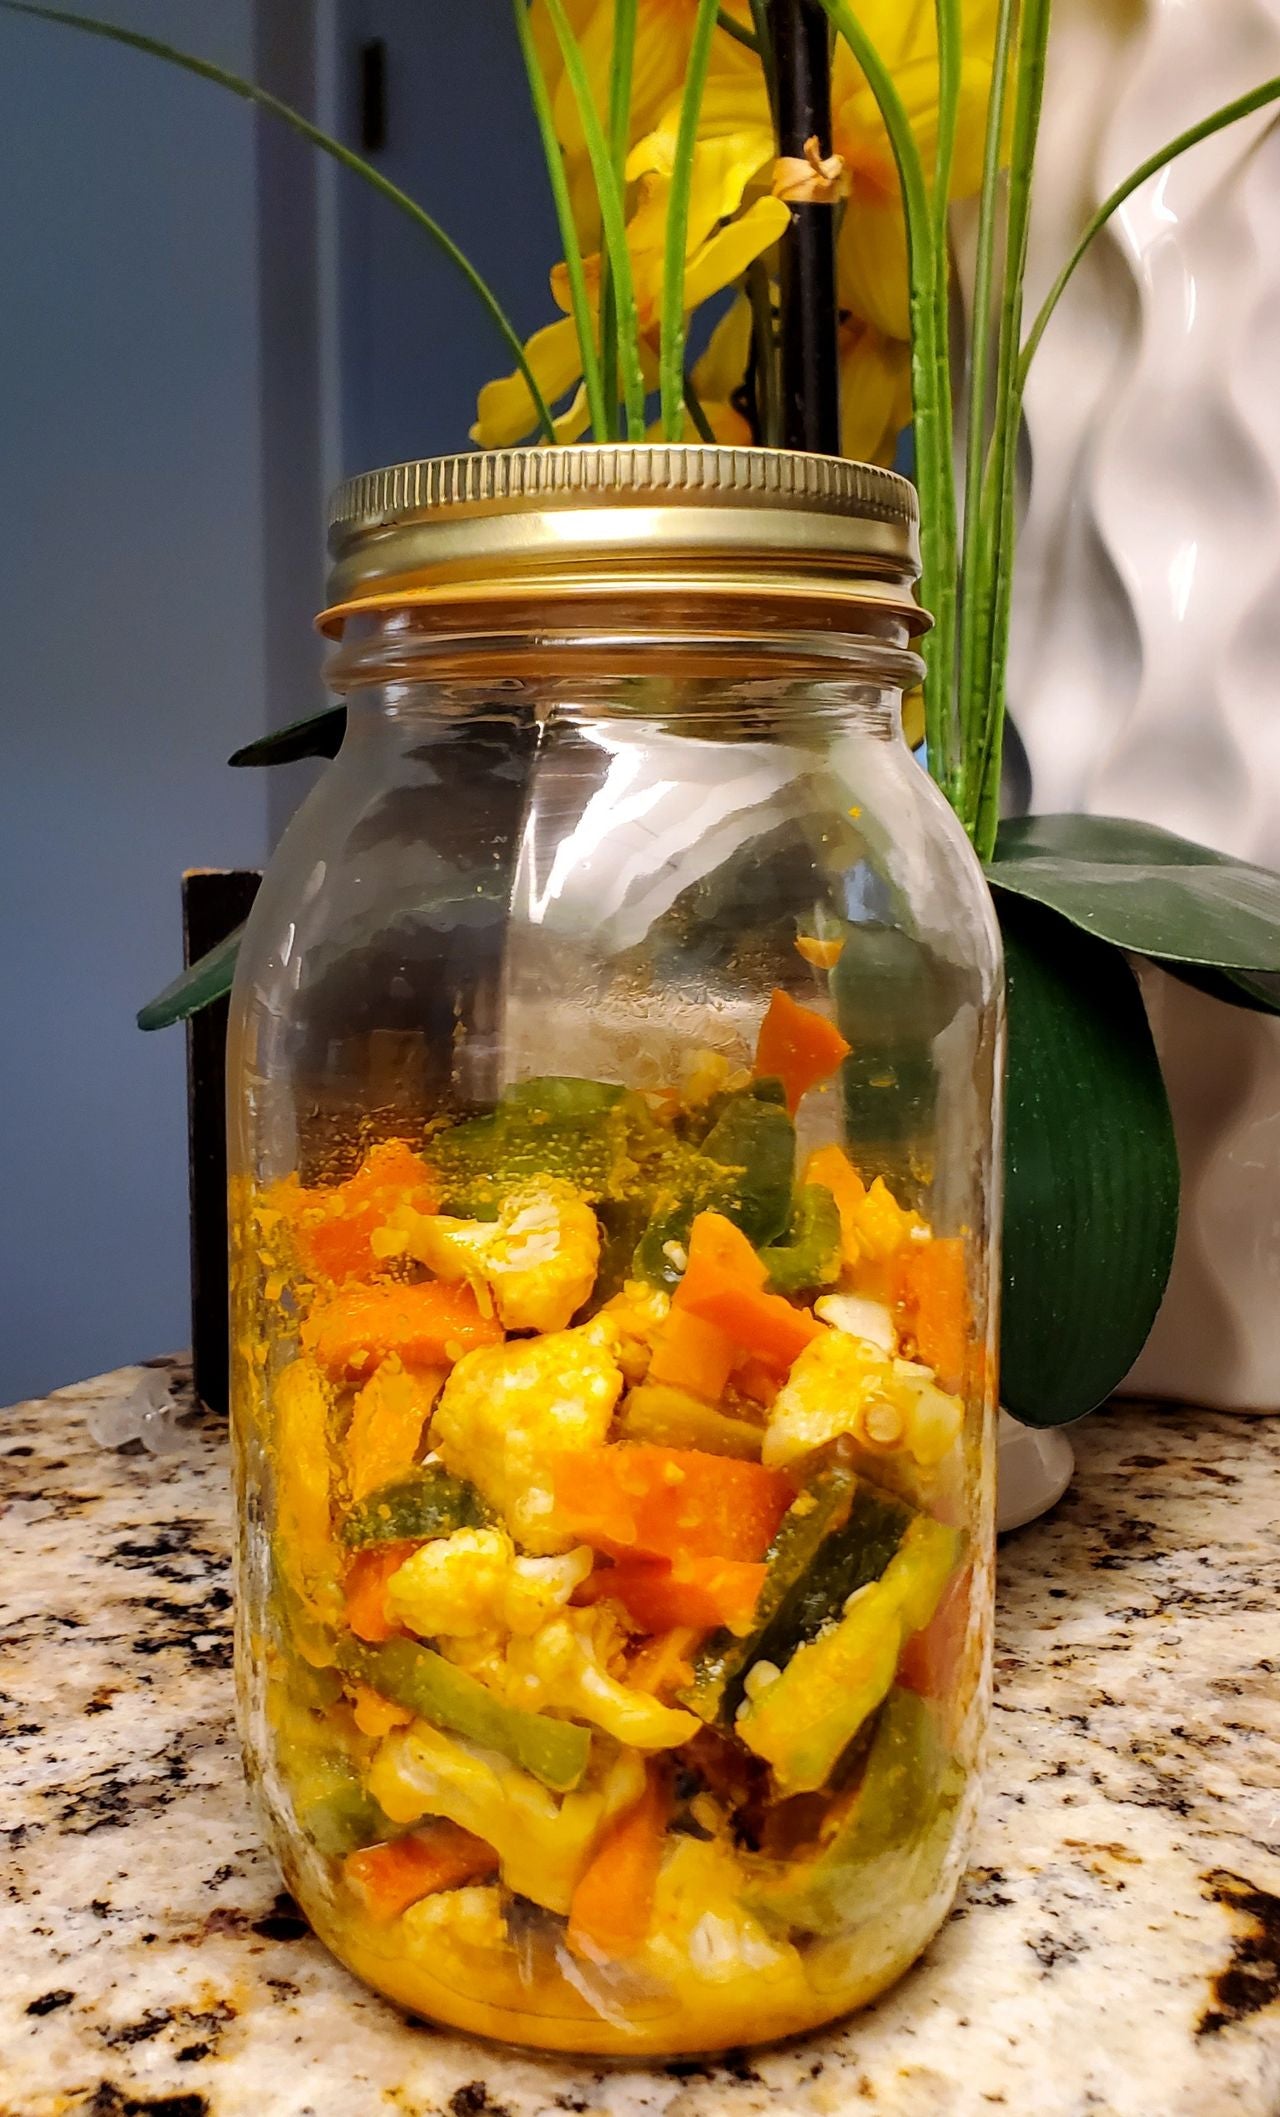 Organic Fresh Turmeric Root with Pickled Vegetables